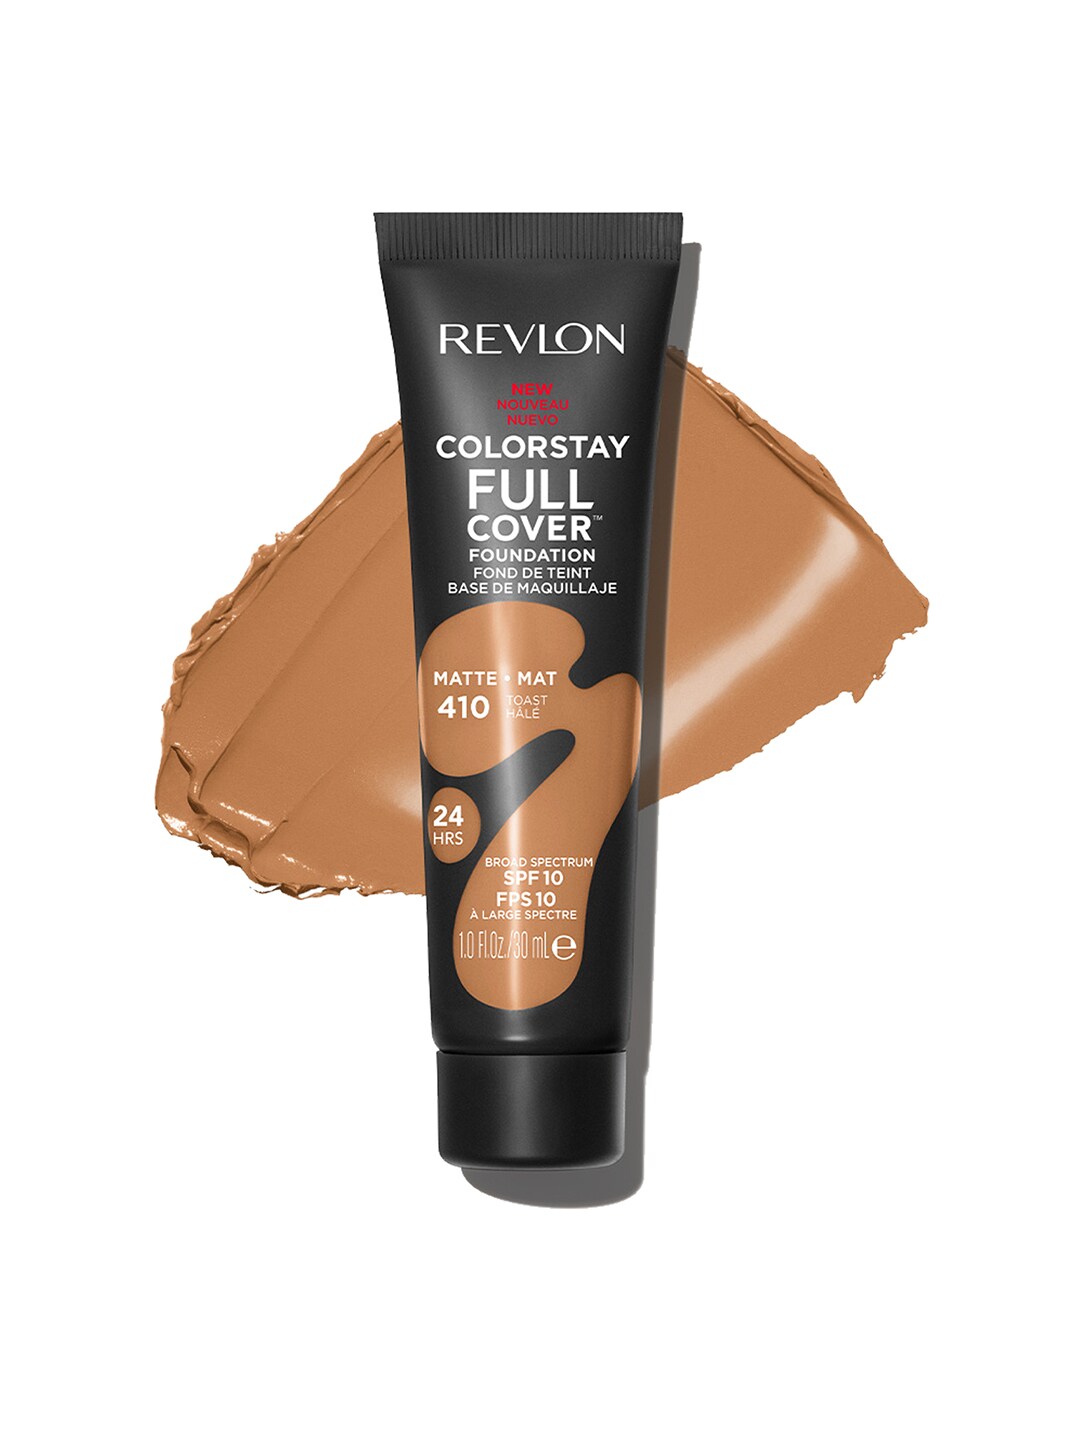 Revlon Colorstay Full Cover Foundation - Toast 410 Price in India